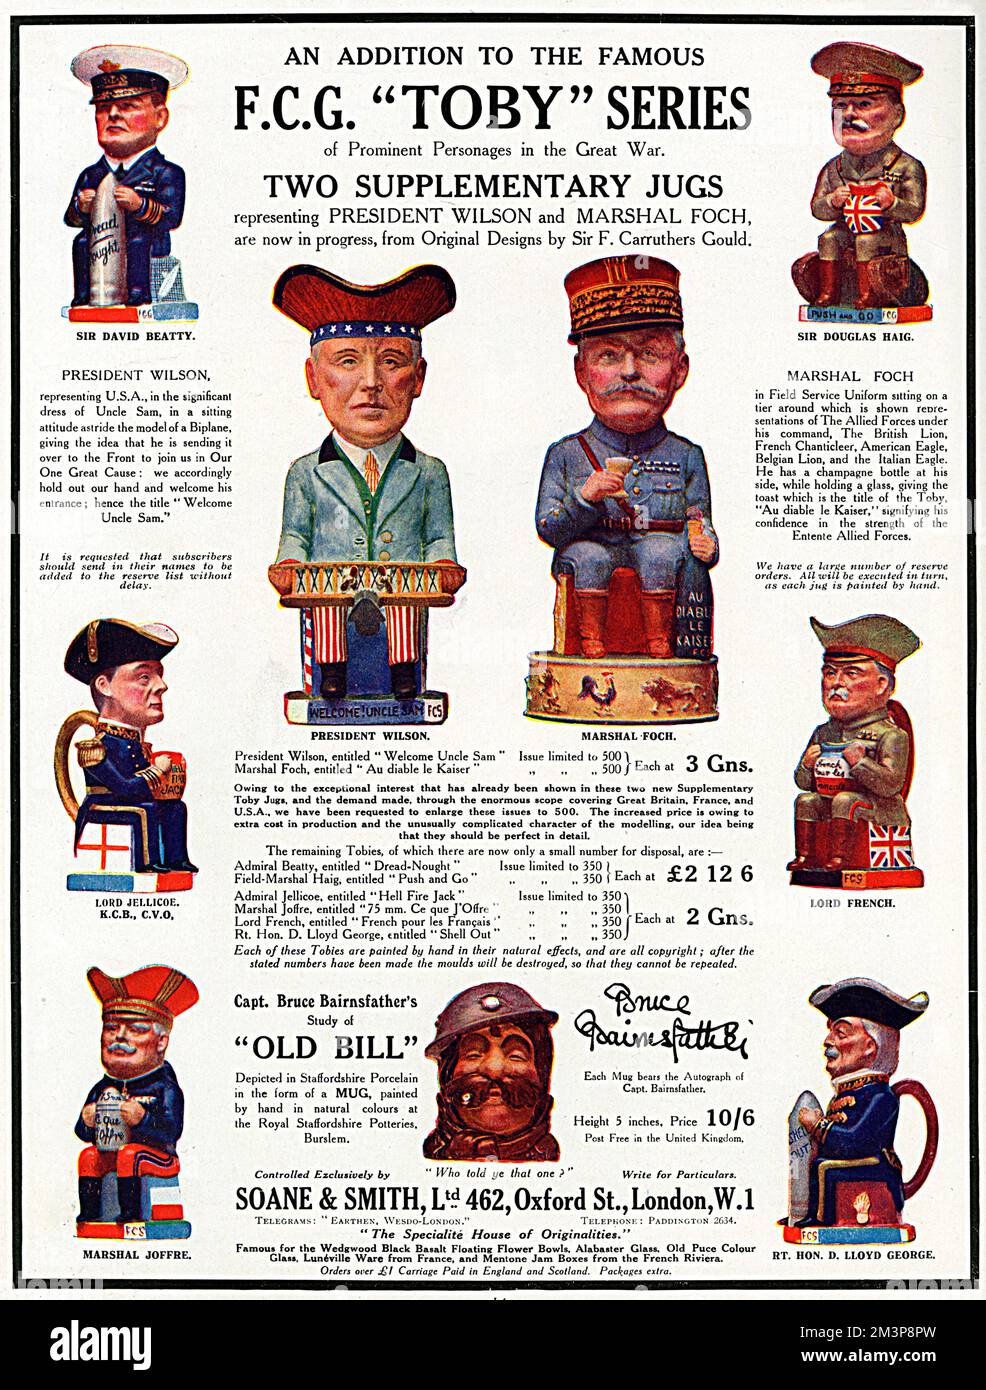 Advertisement for Soane &amp; Smith of Oxford Street, promoting their range of Toby jugs based on wartime leaders, principally Sir David Beatty, Sir Douglas Haig, Lord Jellicoe, Marshal Joffre, Lord French, Prime Minister David Lloyd George,  President Woodrow Wilson and Marshal Foch.  Last but not least is a special design based on the character Old Bill, portrayed in the hugely popular cartoons by Bruce Bairnsfather in The Bystander magazine.       Date: 1918 Stock Photo